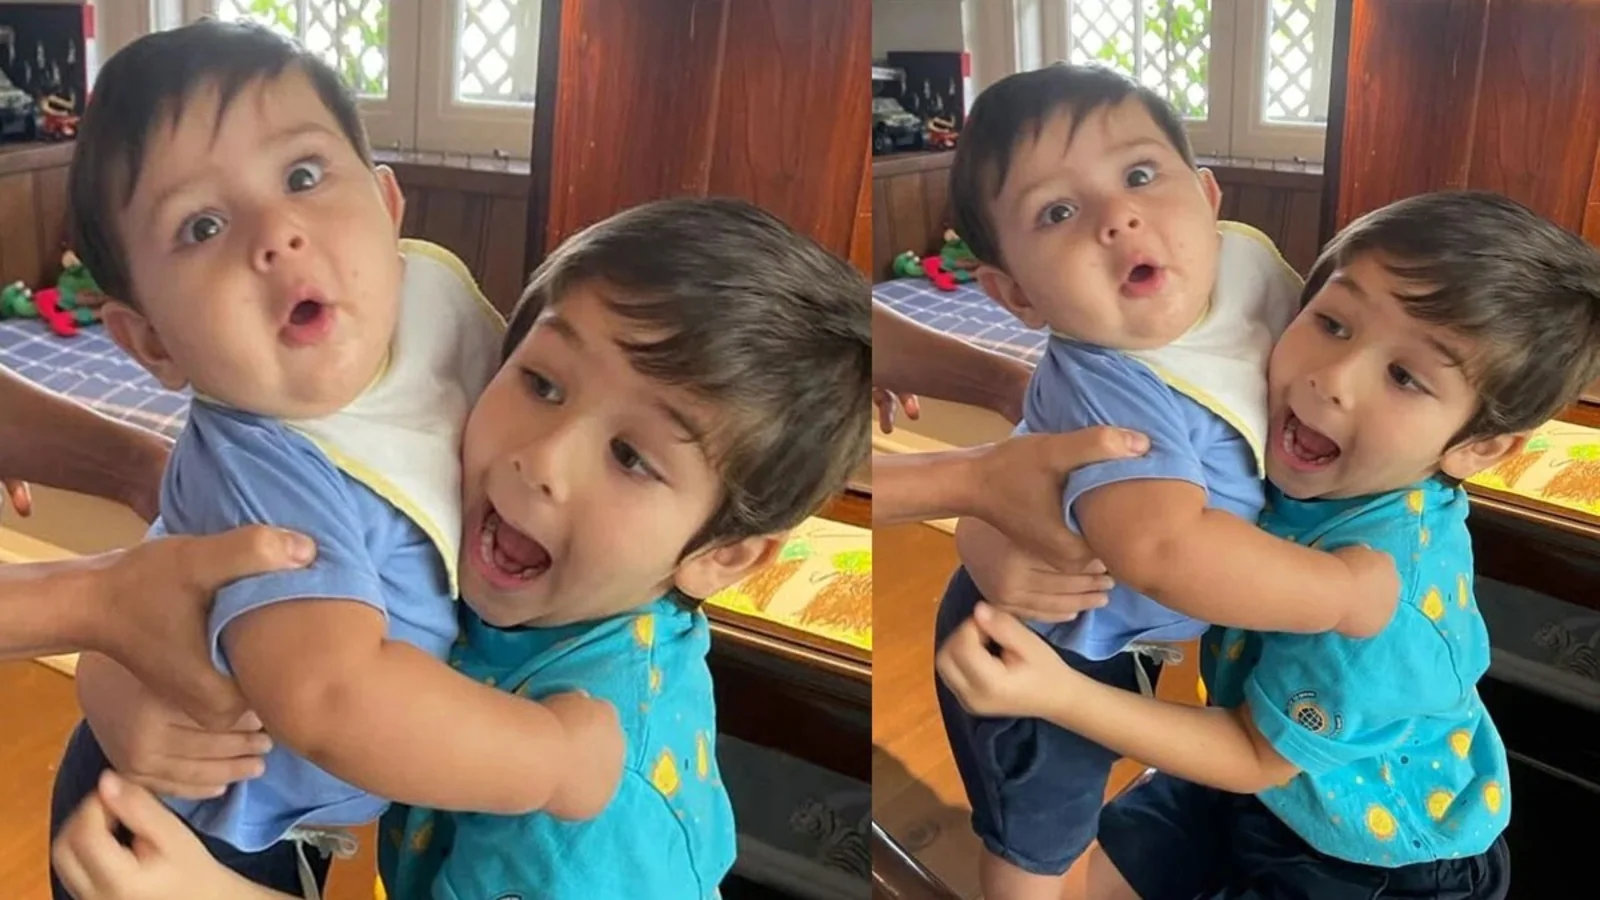 Taimur tries to protect Jehangir as he grabs him, Saba Ali Khan says ‘that’s why we have protective older bhaijaan’